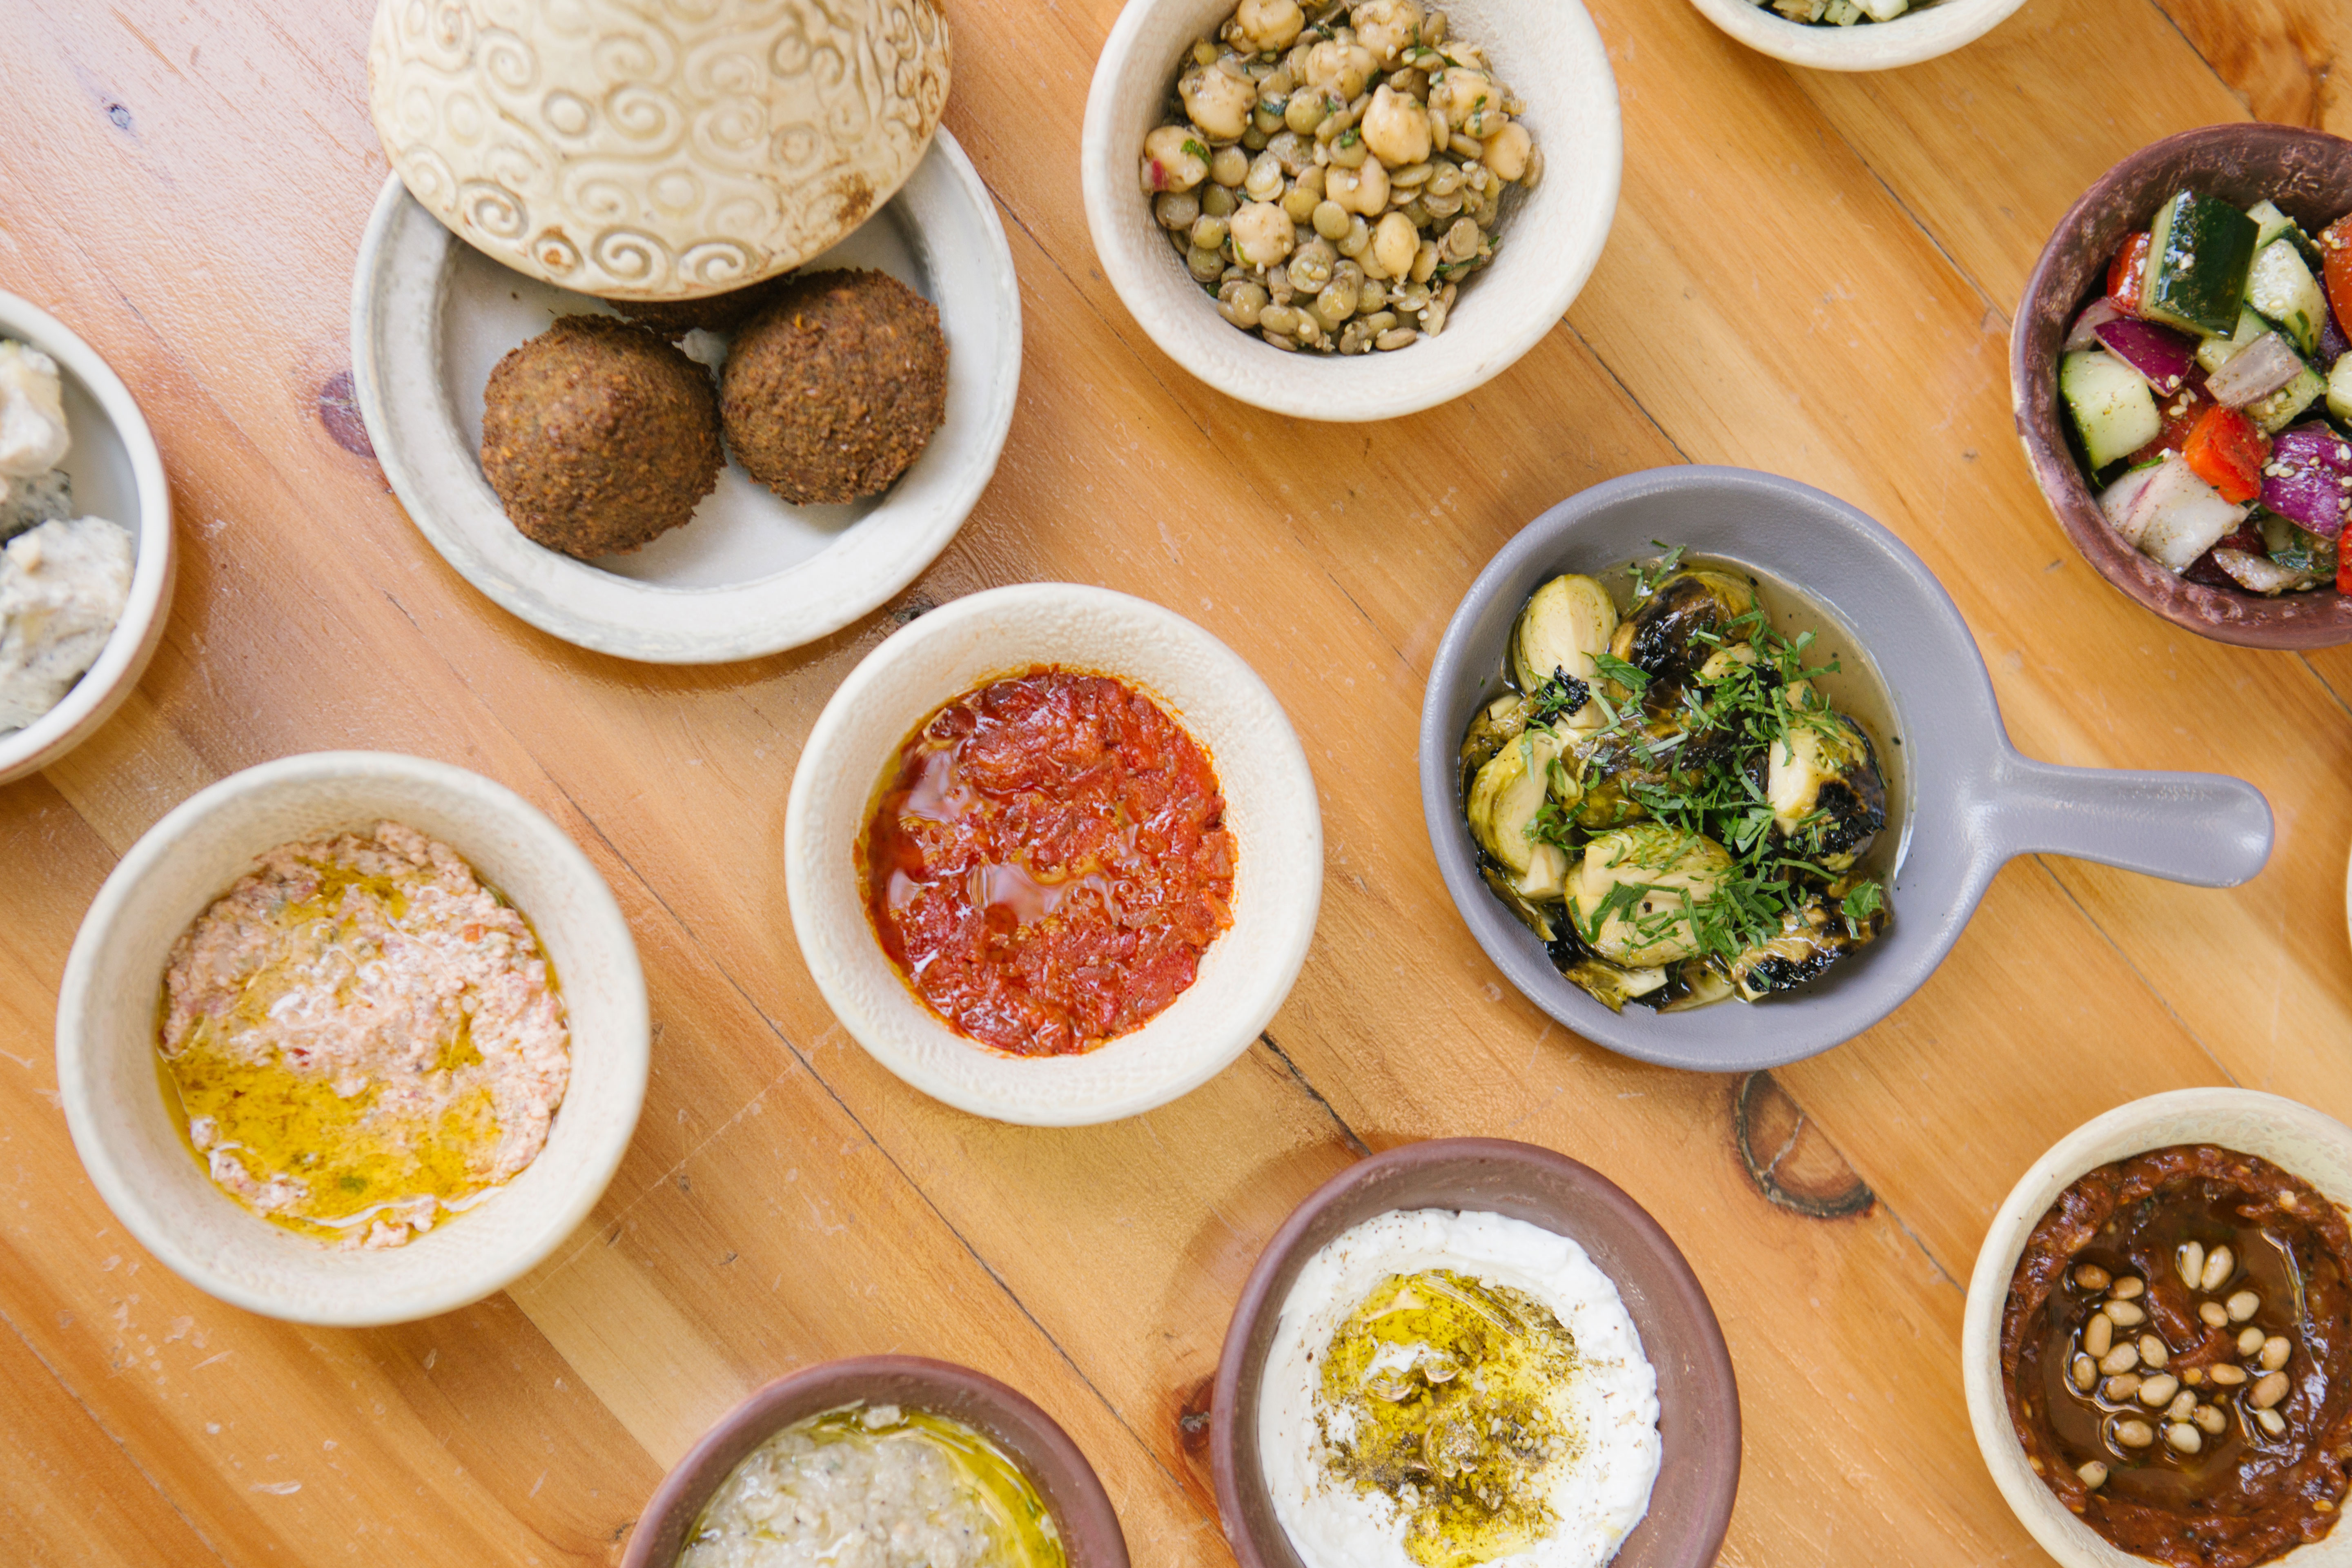 A spread of Jewish foods, from falafel to hummus